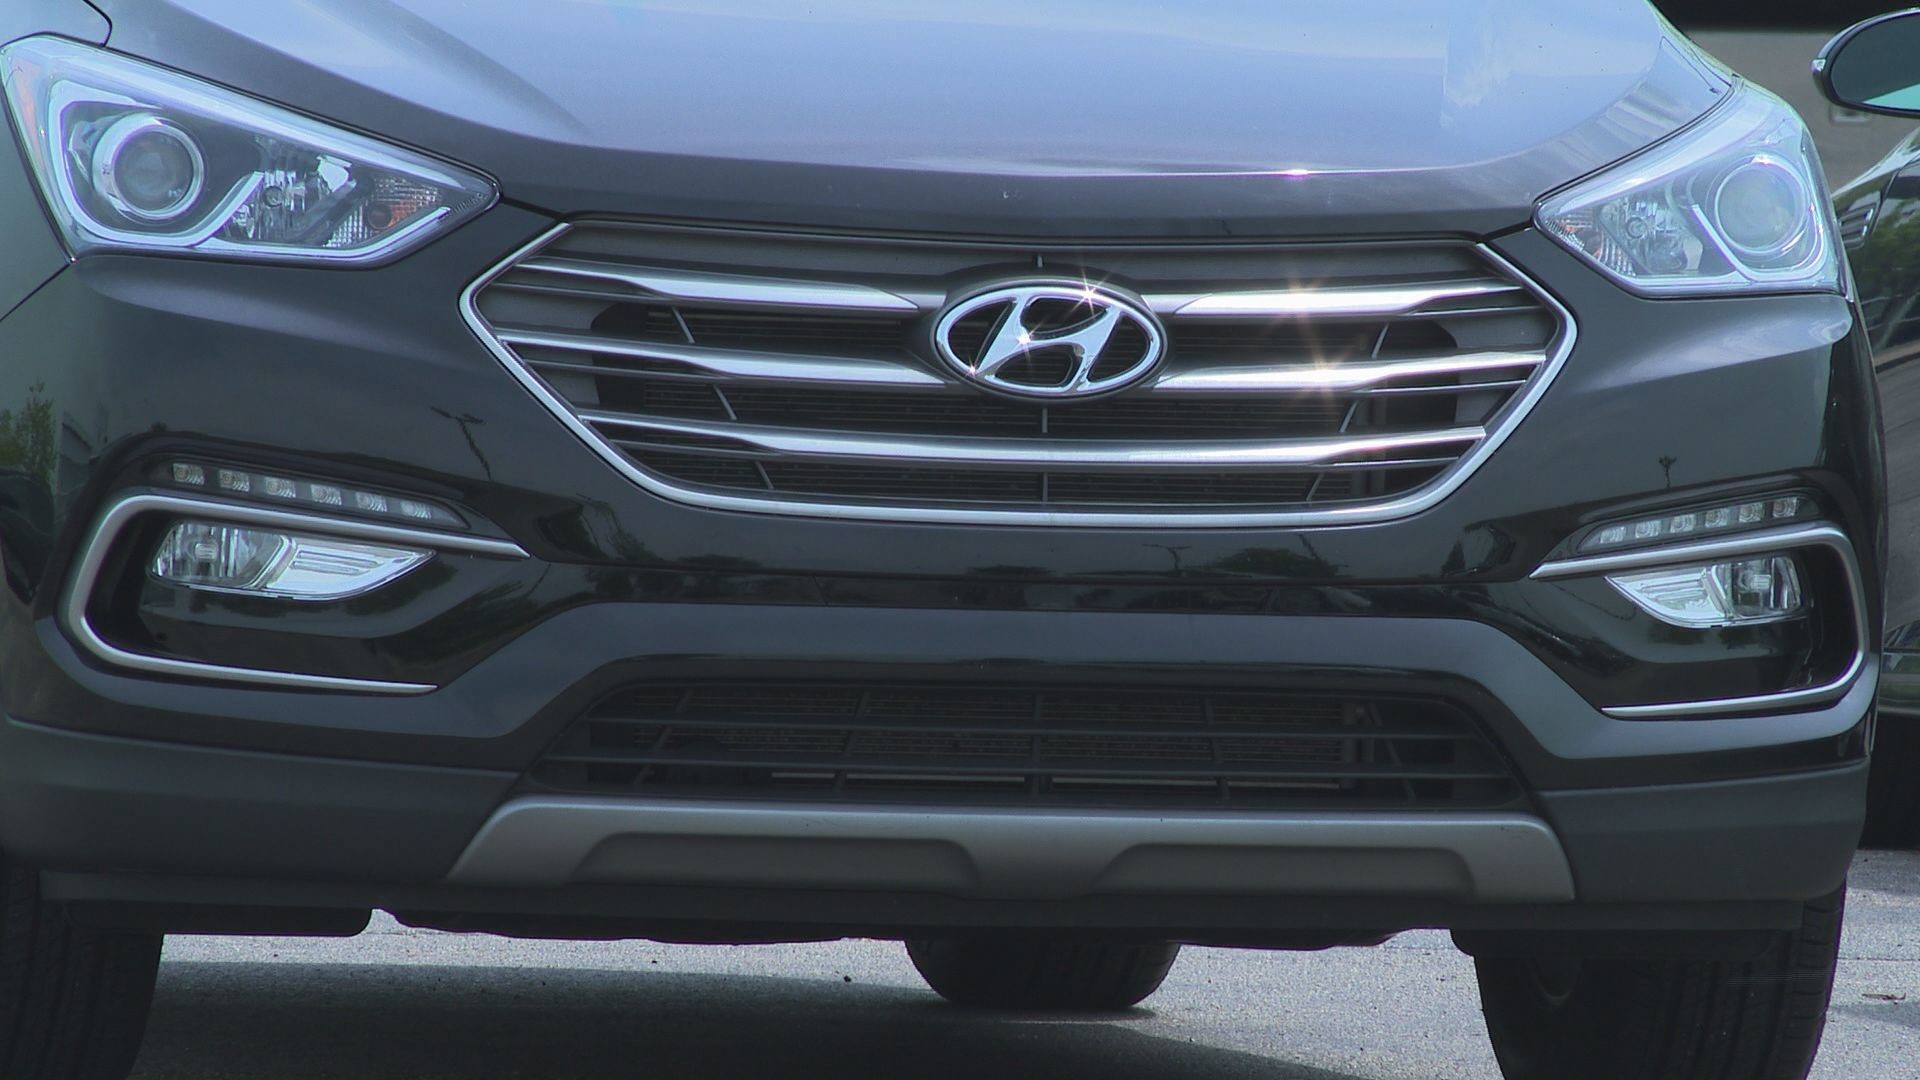 Hyundai and GRPD are hosting an installation clinic at 555 Monroe Avenue in Grand Rapids Sunday through Tuesday.